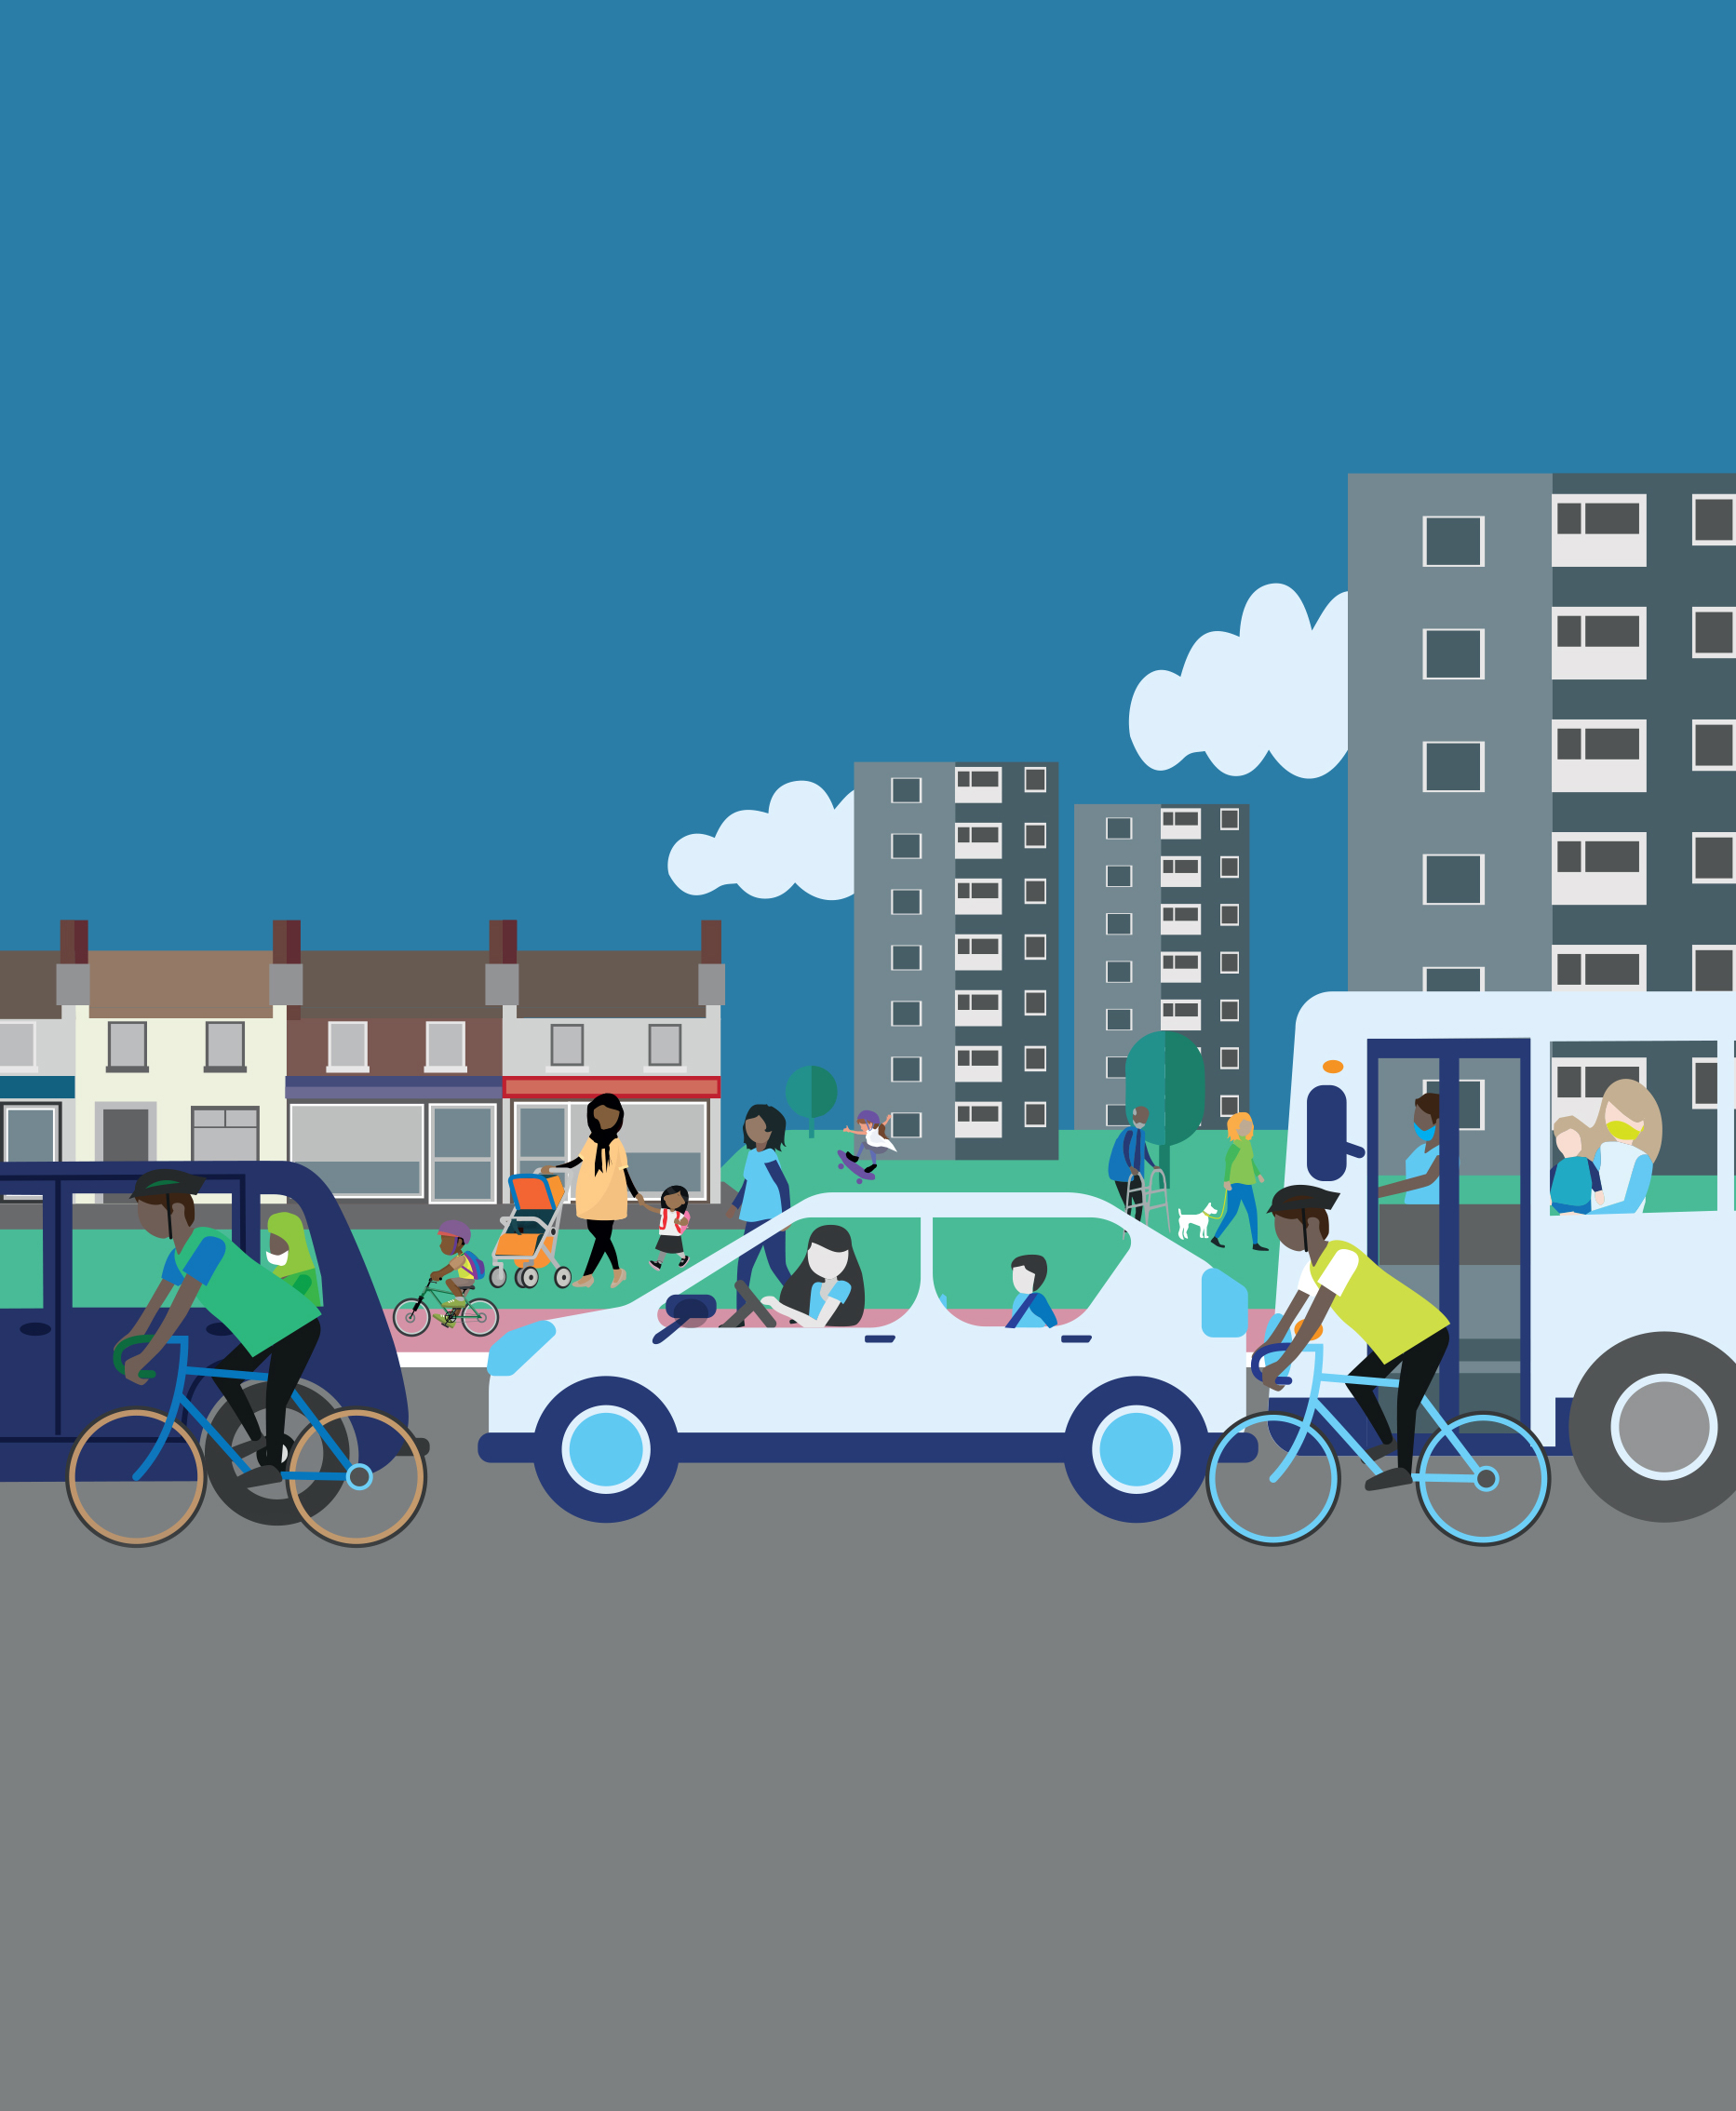 Graphic showing a mixture of sustainable transport such as bicycles, buses and cars